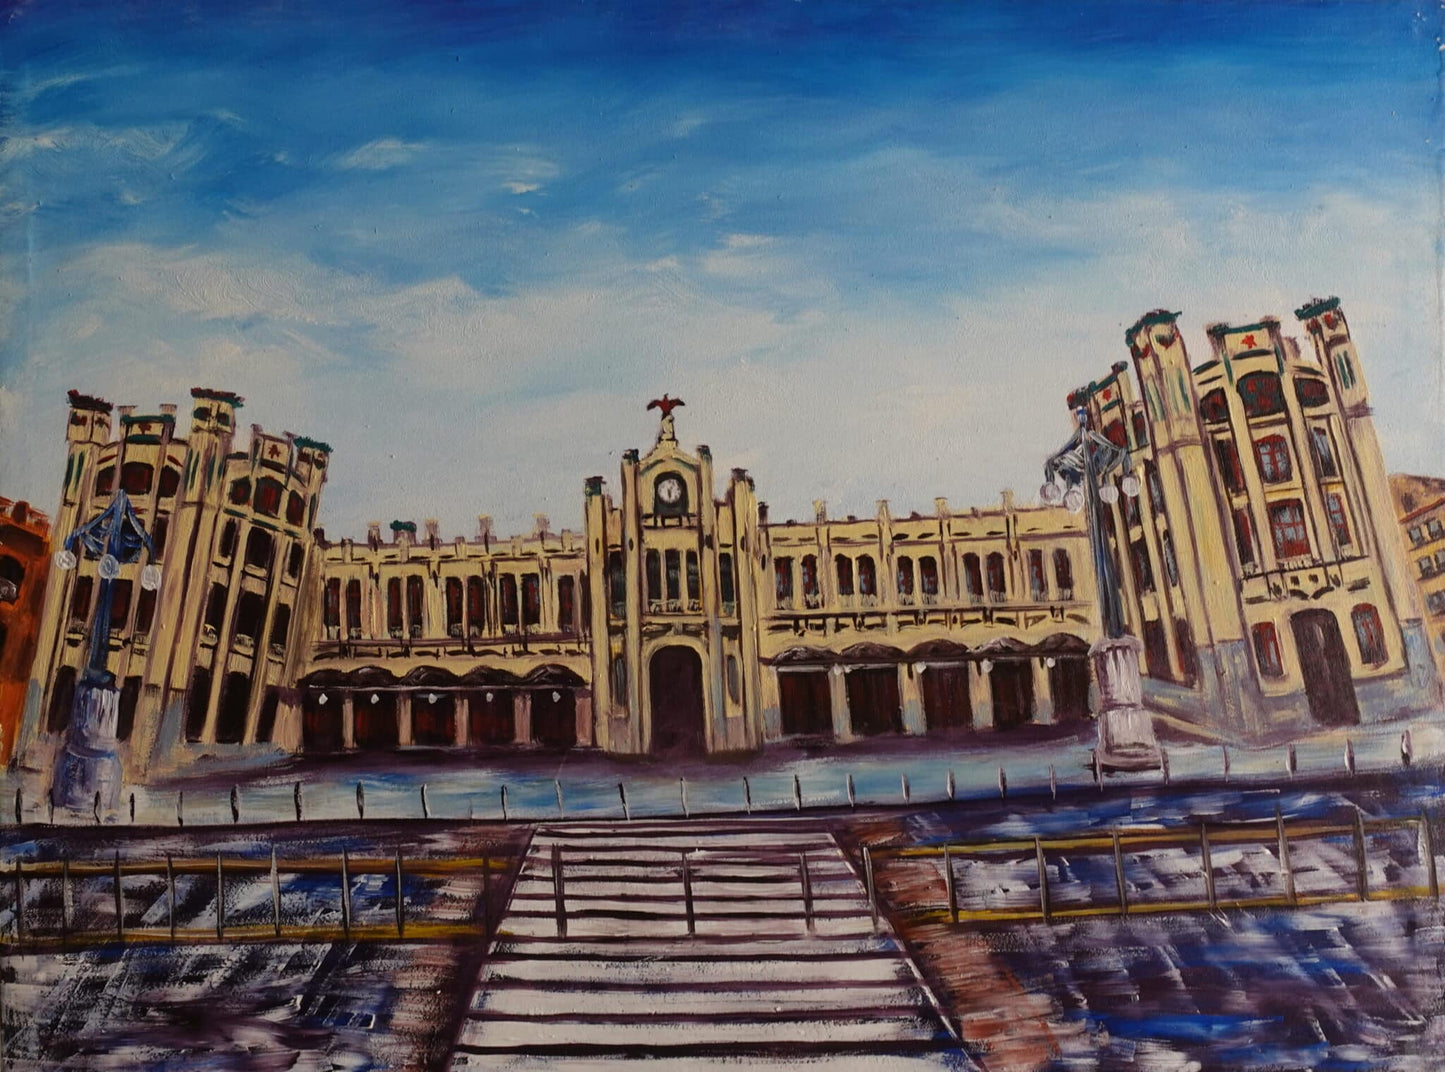 Original painting from Valencia